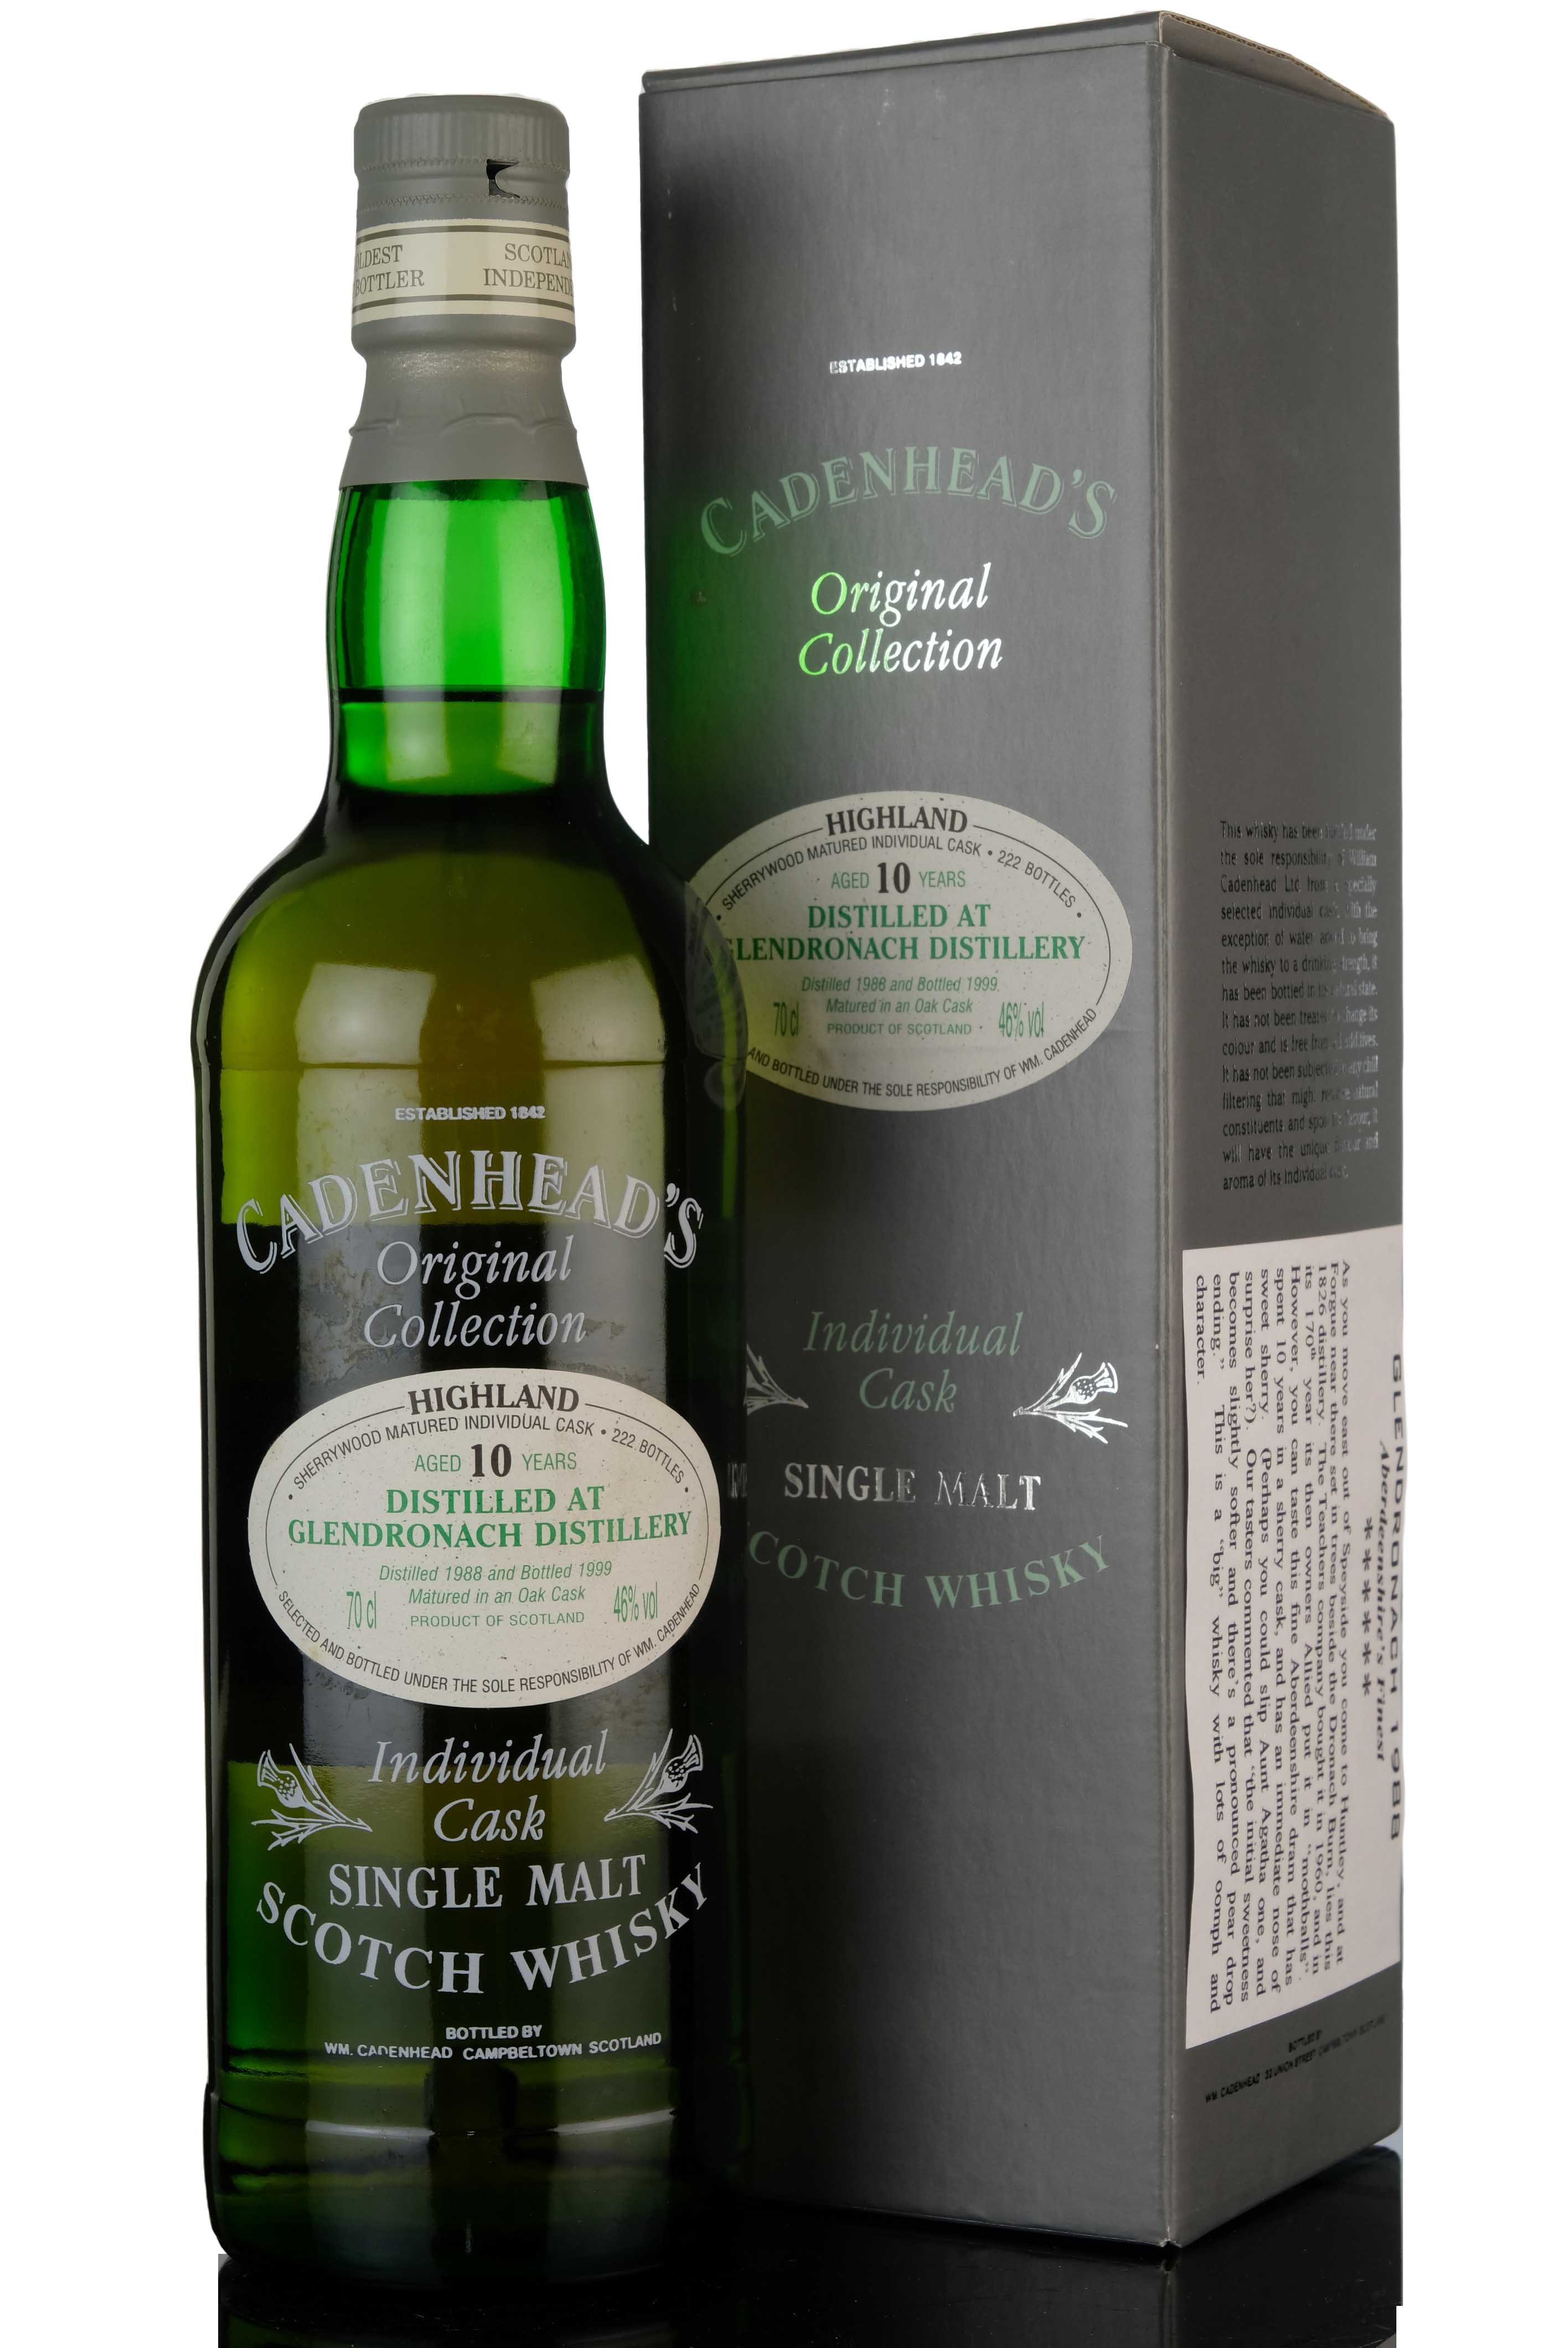 Glendronach 1988-1999 - 10 Year Old - Cadenheads Original Collection - Sherry Cask